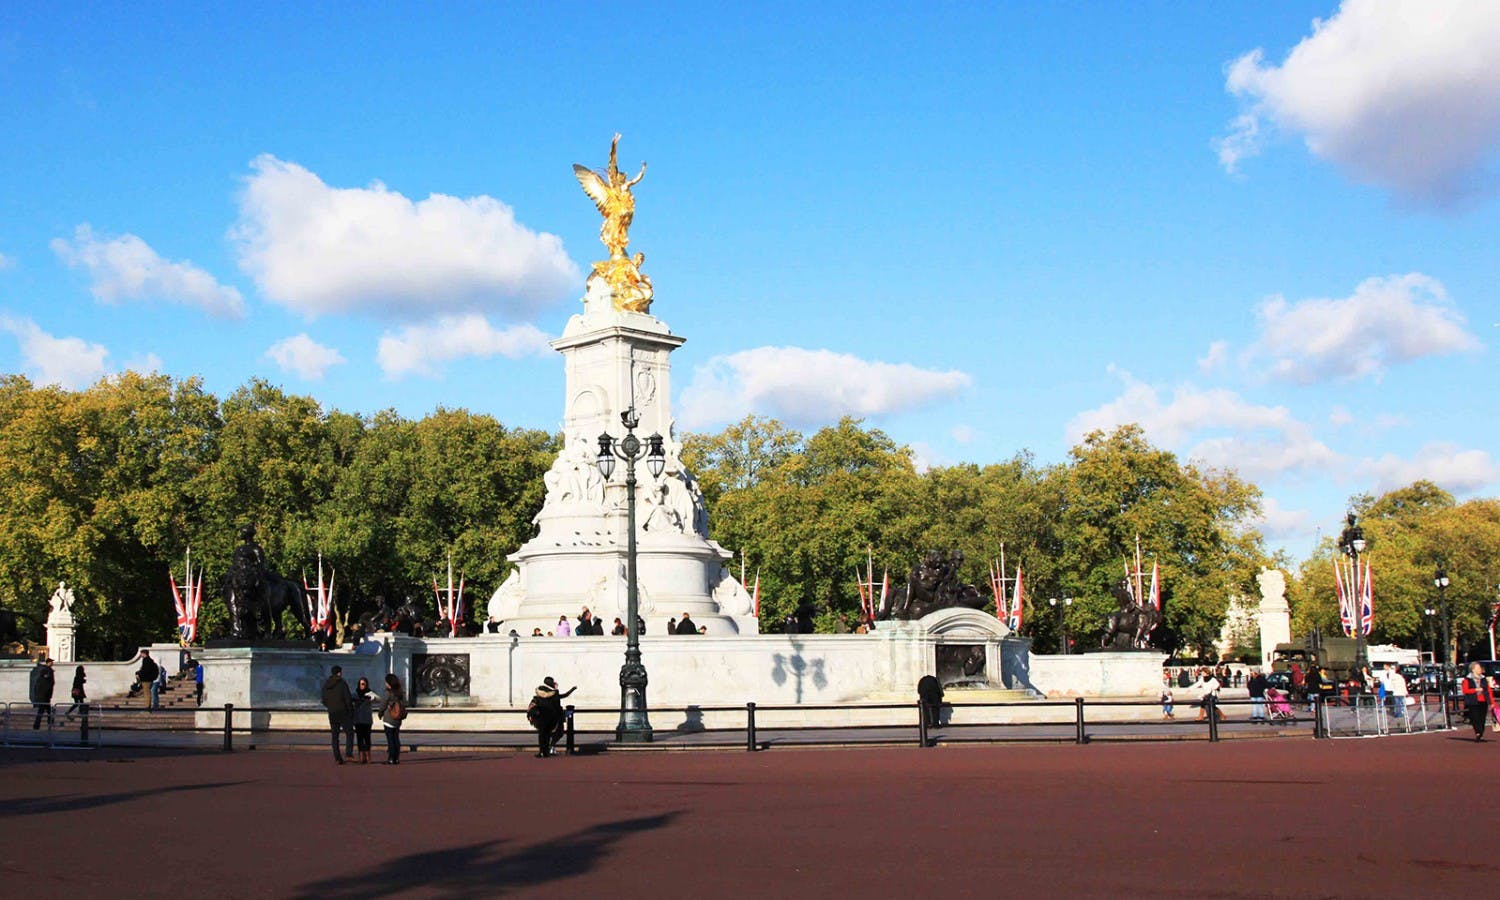 Buckingham Palace - Tour and Tickets - Victoria Memorial